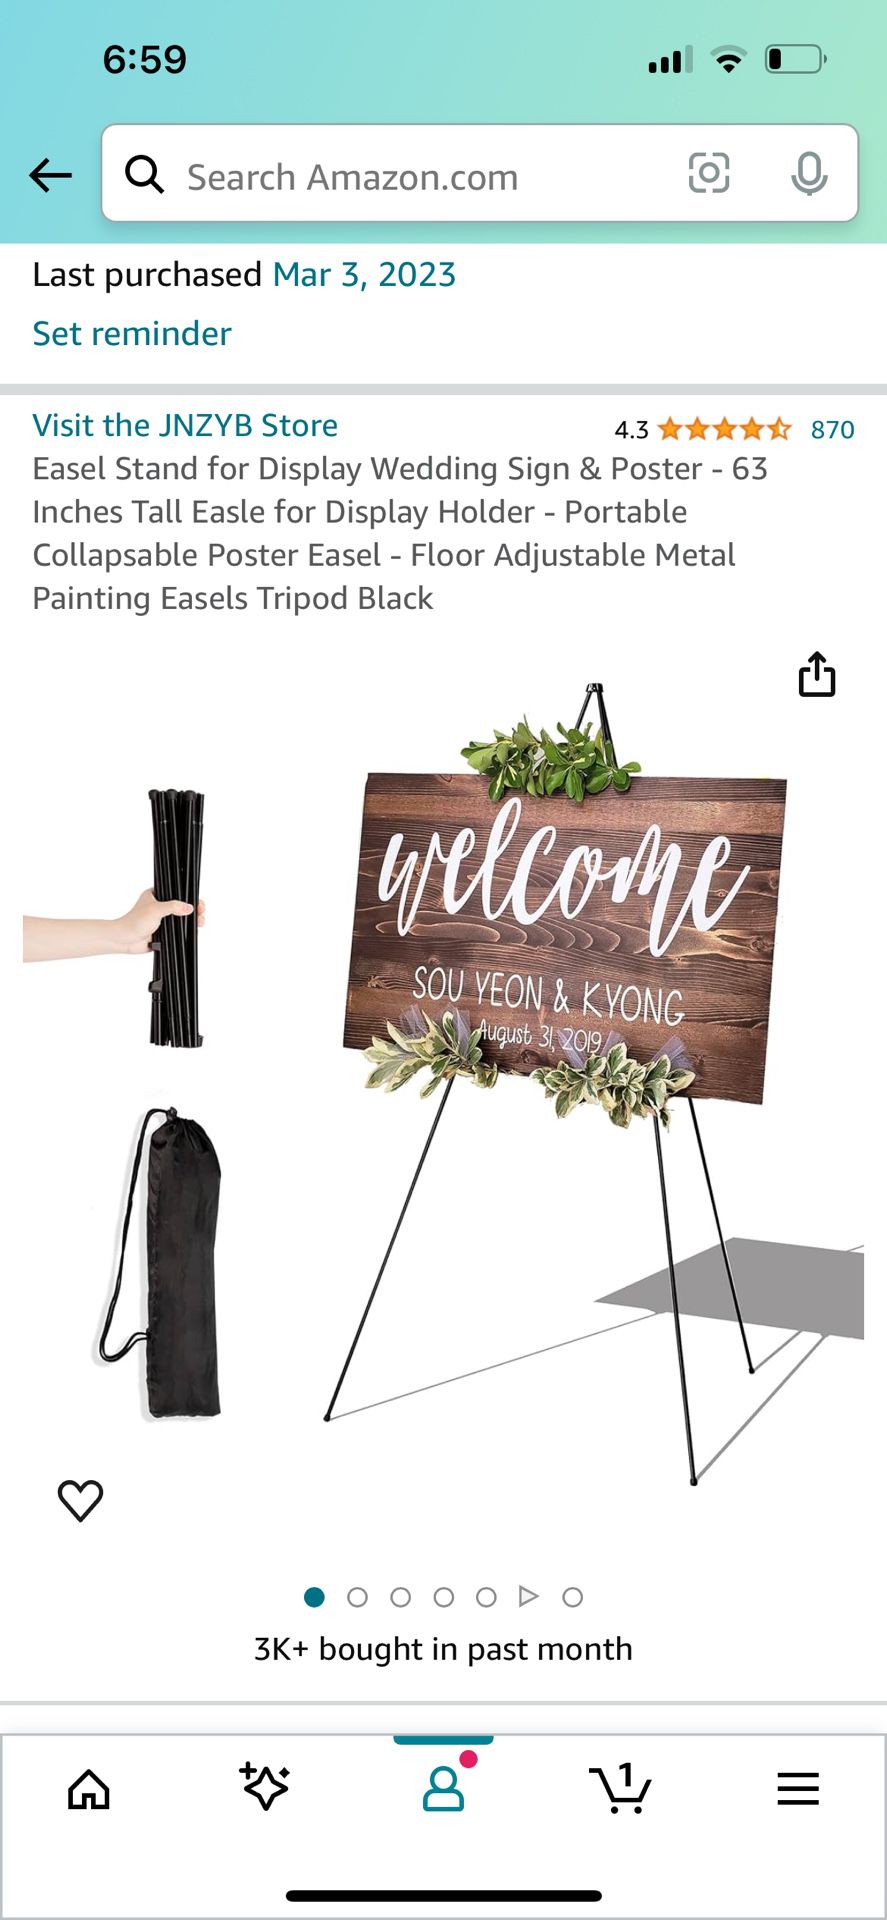 Easel Stand for Display Wedding Sign 63 Inches Tall